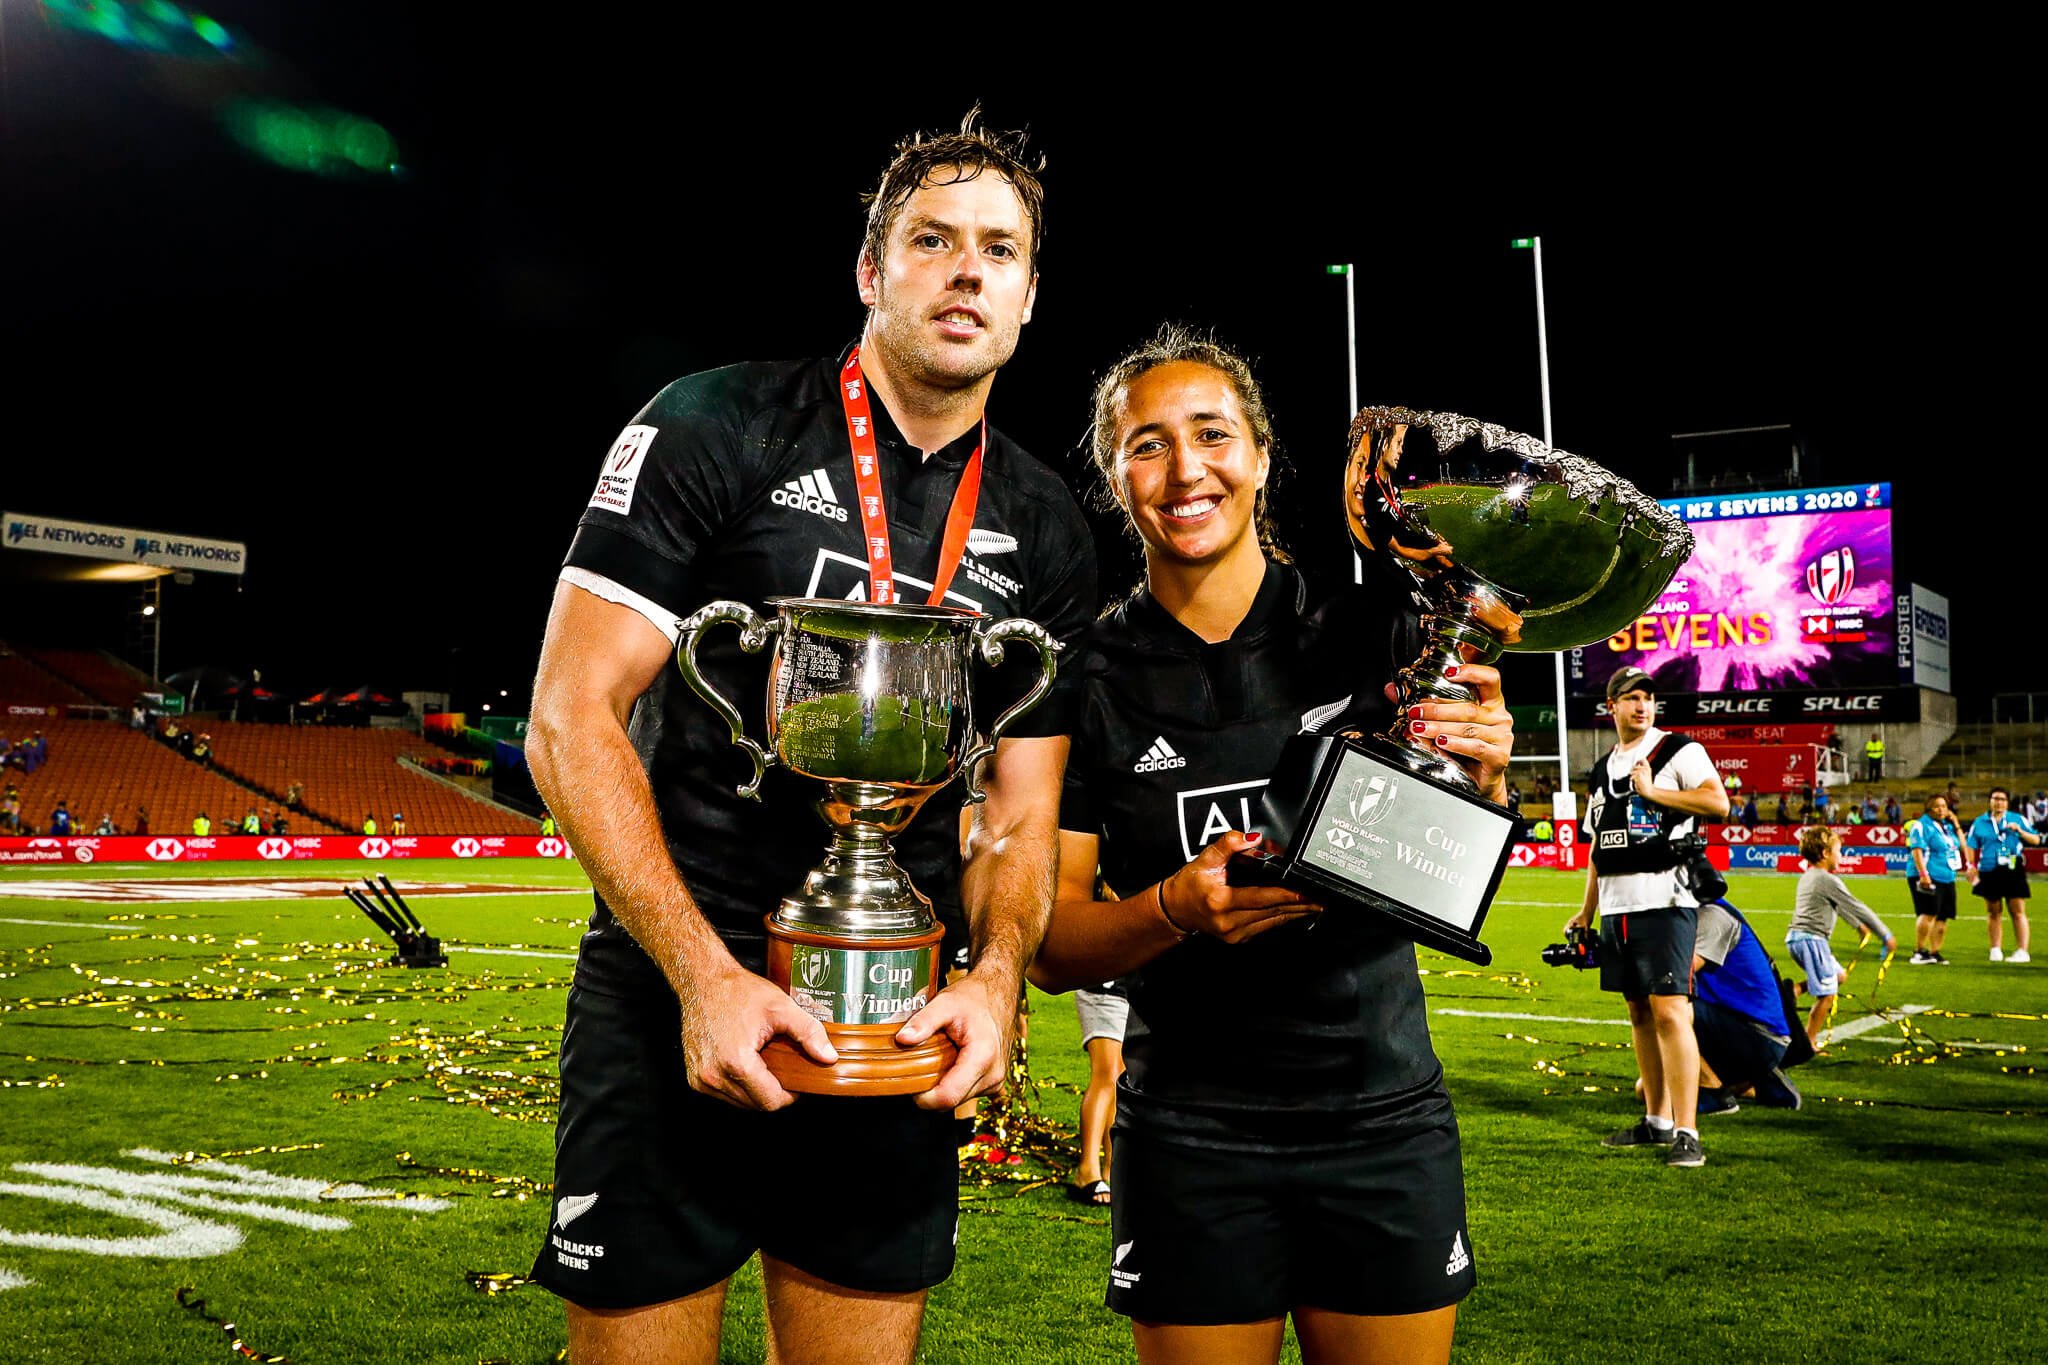 Sarah Gross and Tim Mikkelson celebrate their win at the New Zealand Sevens 2020